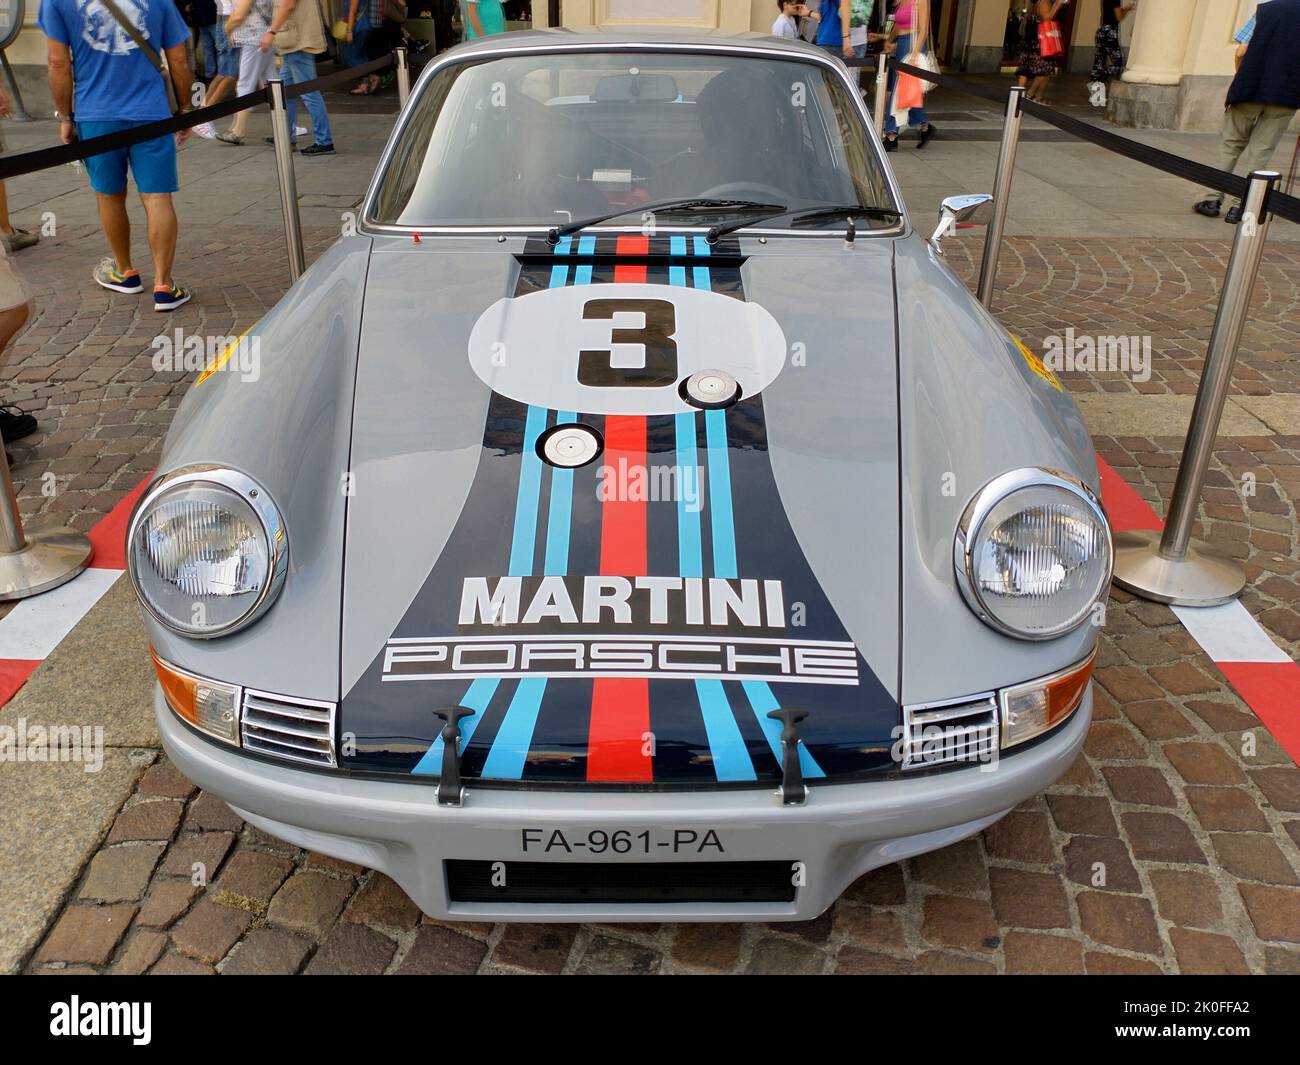 Italie Piémont Turin 'Autolook week Torino' - PORSCHE 911 2,8 RSR MARTINI Credit: Realy Easy Star/Alamy Live News Banque D'Images